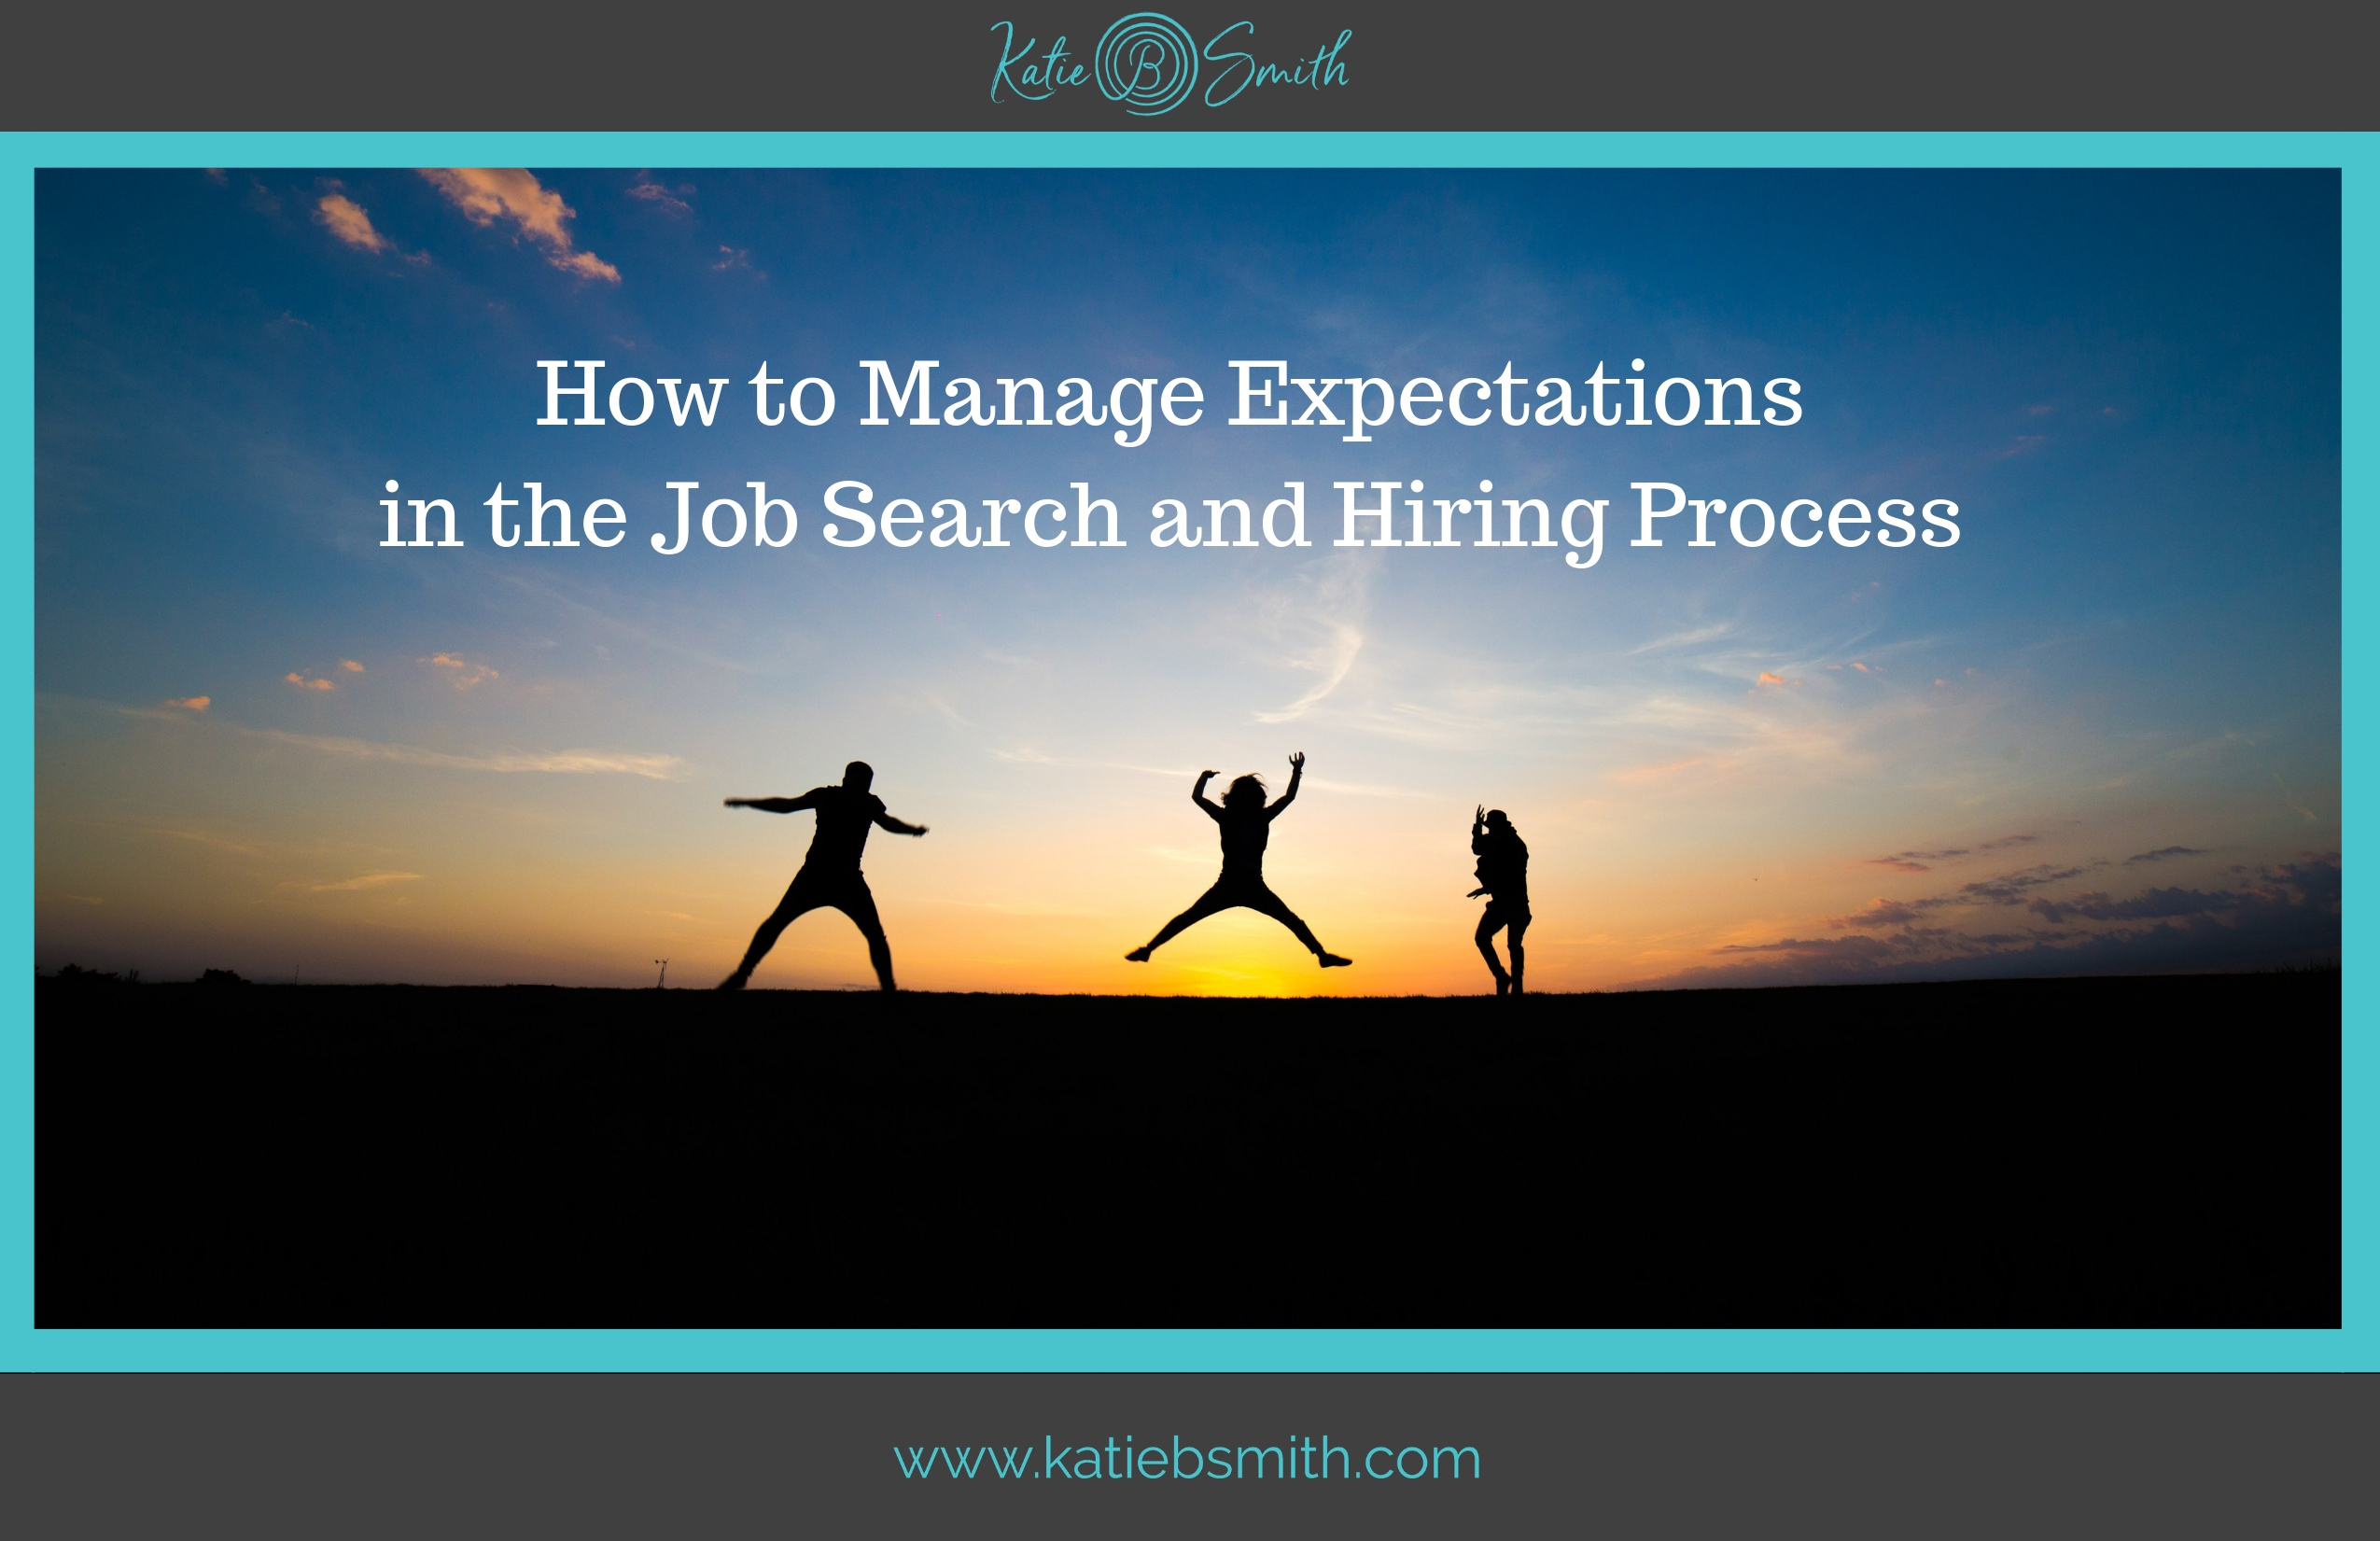 How to Manage Expectations in the Job Search and Hiring Process